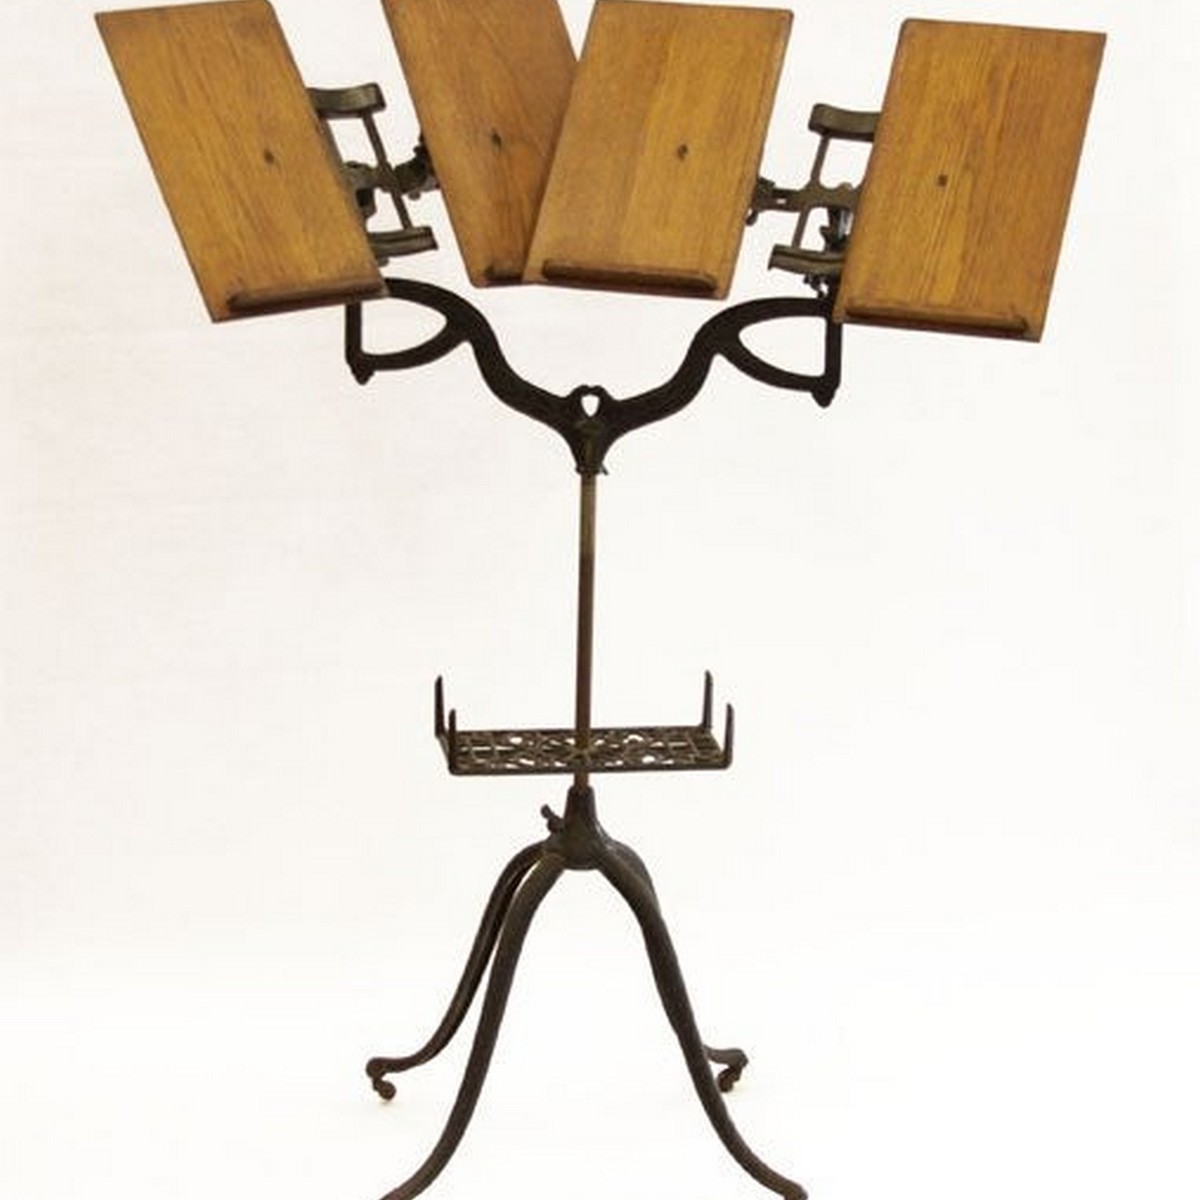 20th C. Cast Iron & Wooden Adjustable Stand